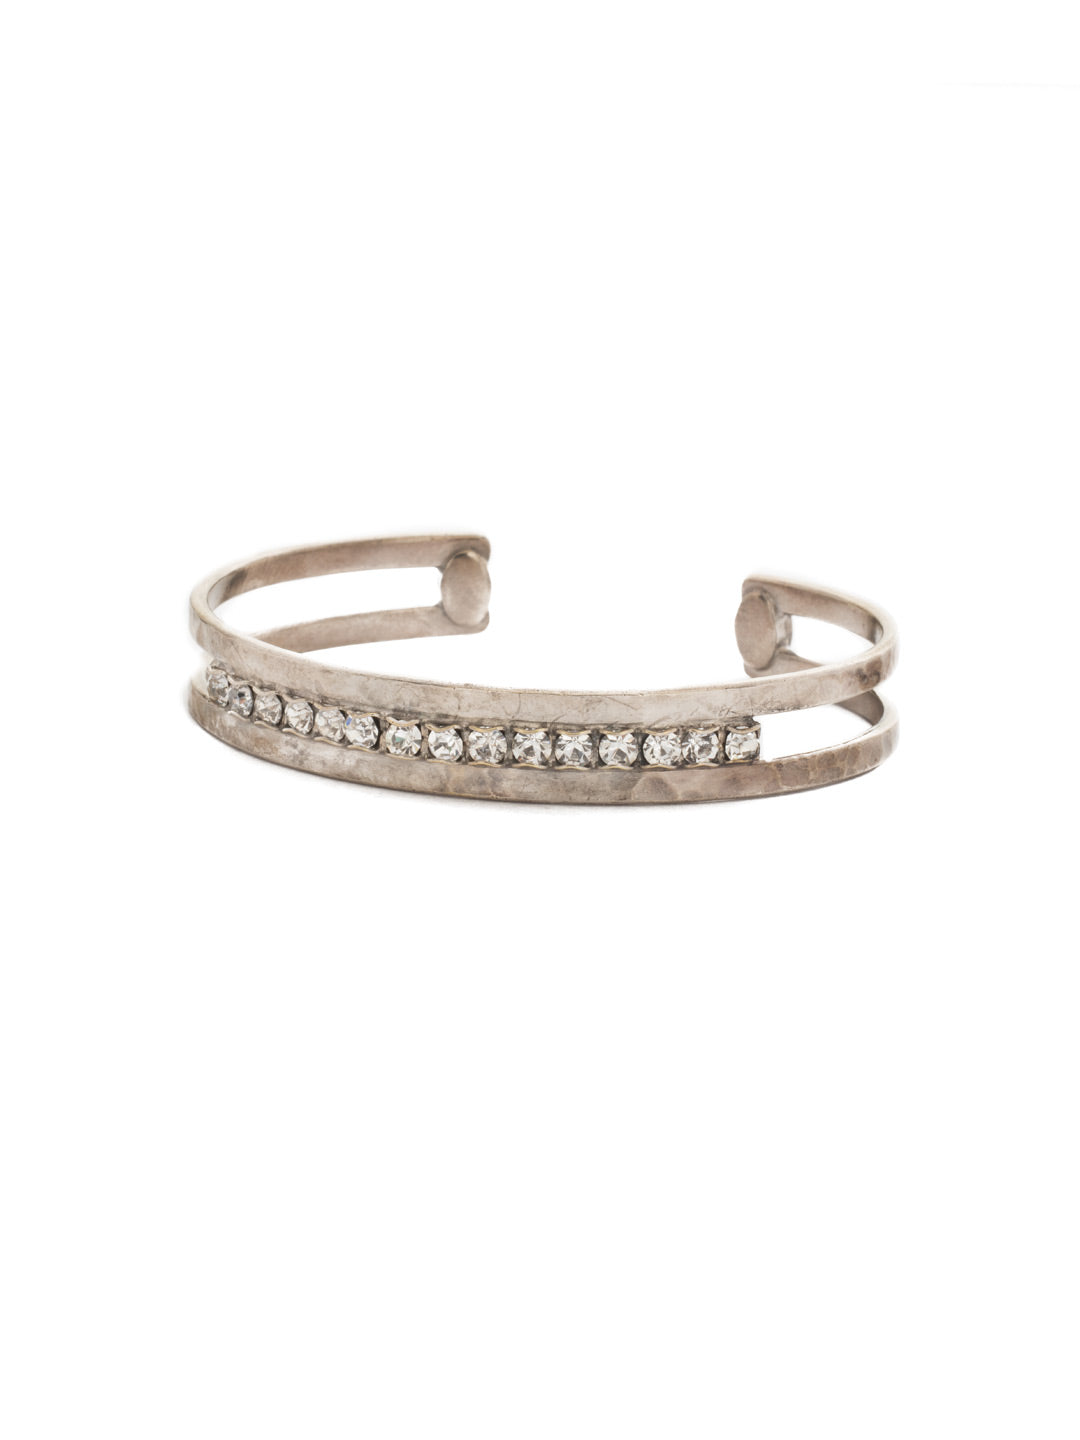 Hammered Metal Cuff Bracelet - BDC6ASCRY - <p>Stacking done for you! This unique cuff features a row of crystals set between two thin, hammered metal cuffs. From Sorrelli's Crystal collection in our Antique Silver-tone finish.</p>